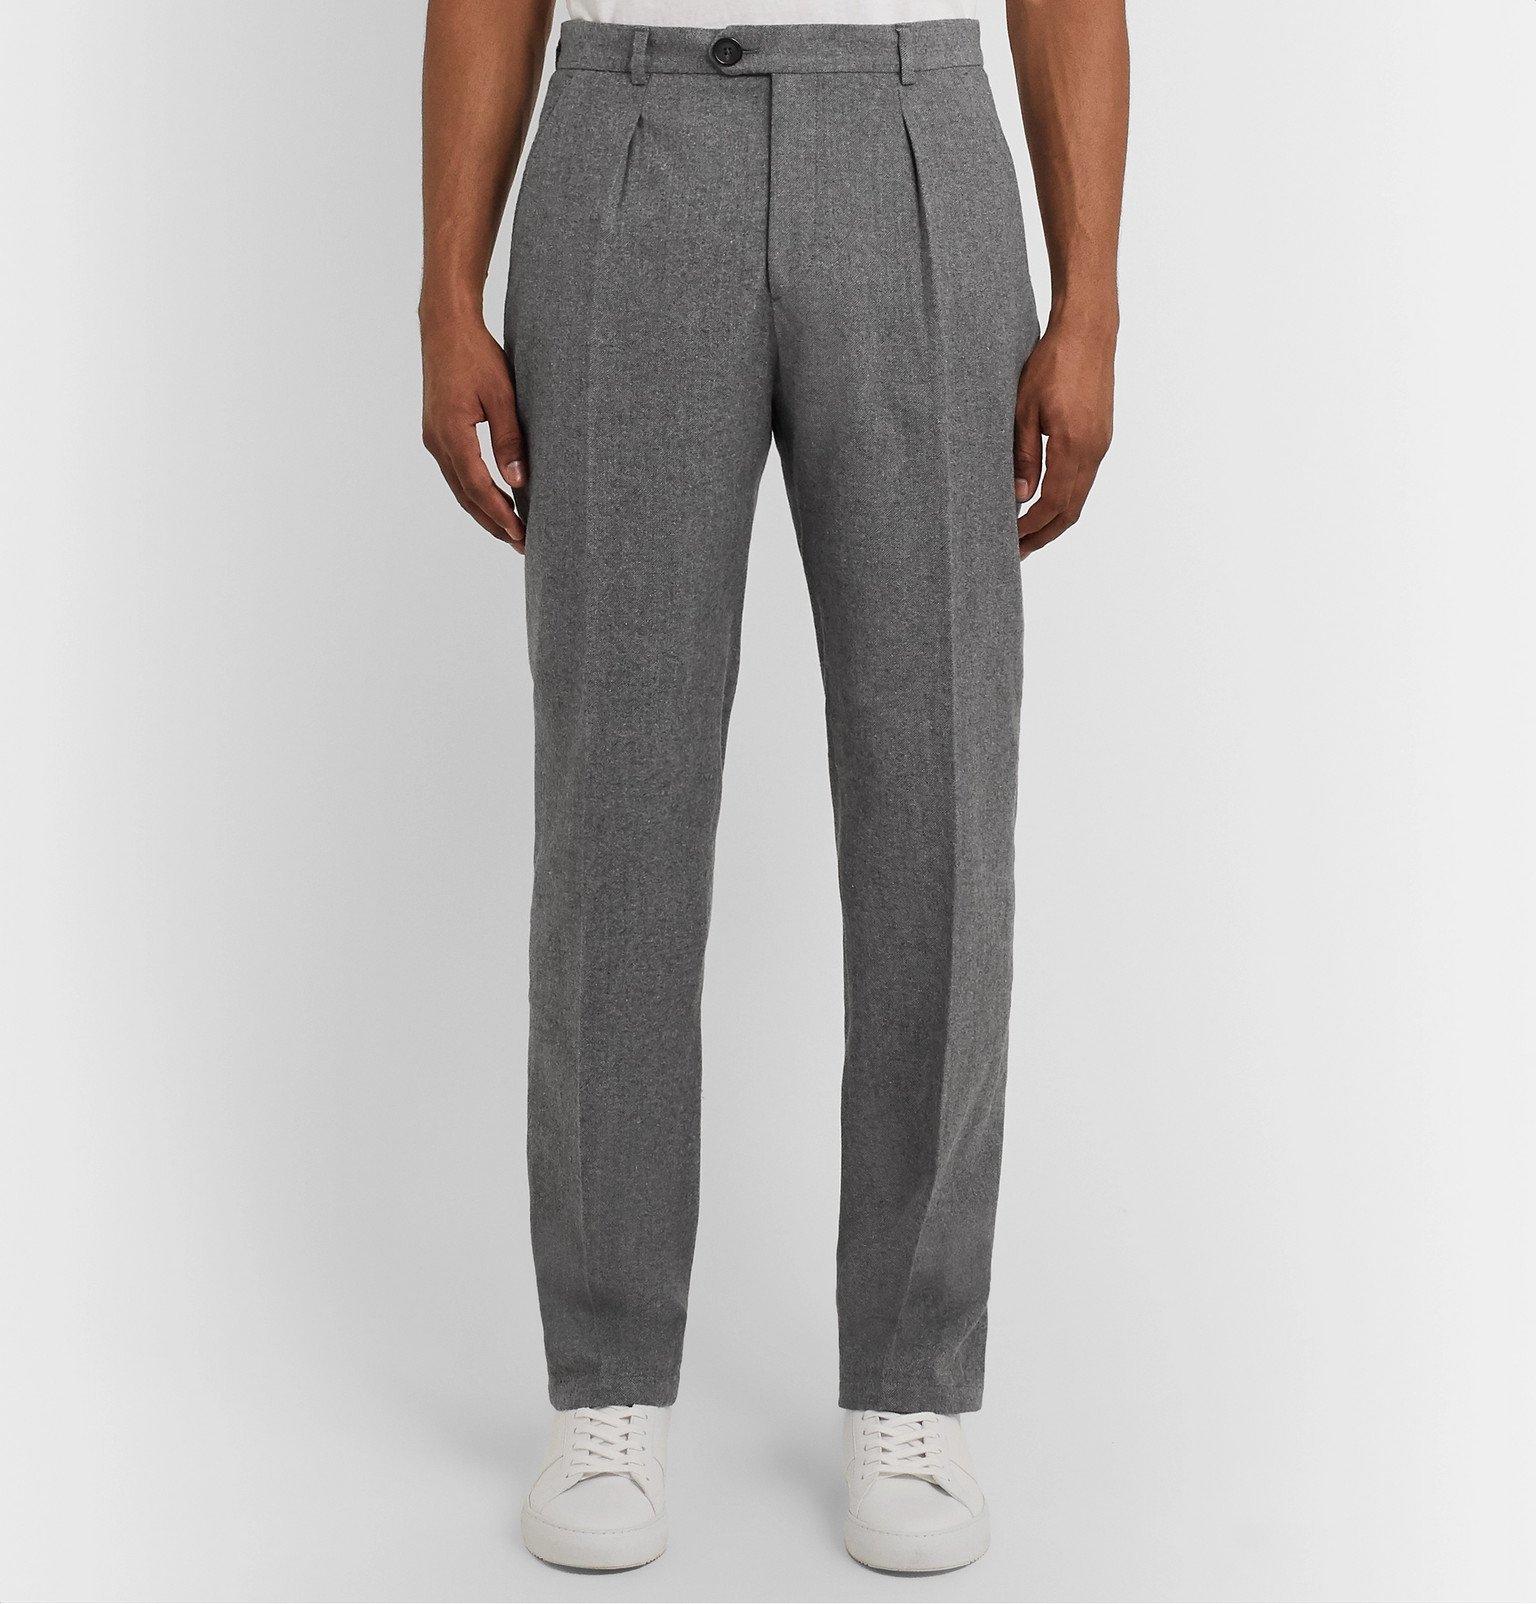 Oliver Spencer - Pleated Cotton and Wool-Blend Trousers - Gray